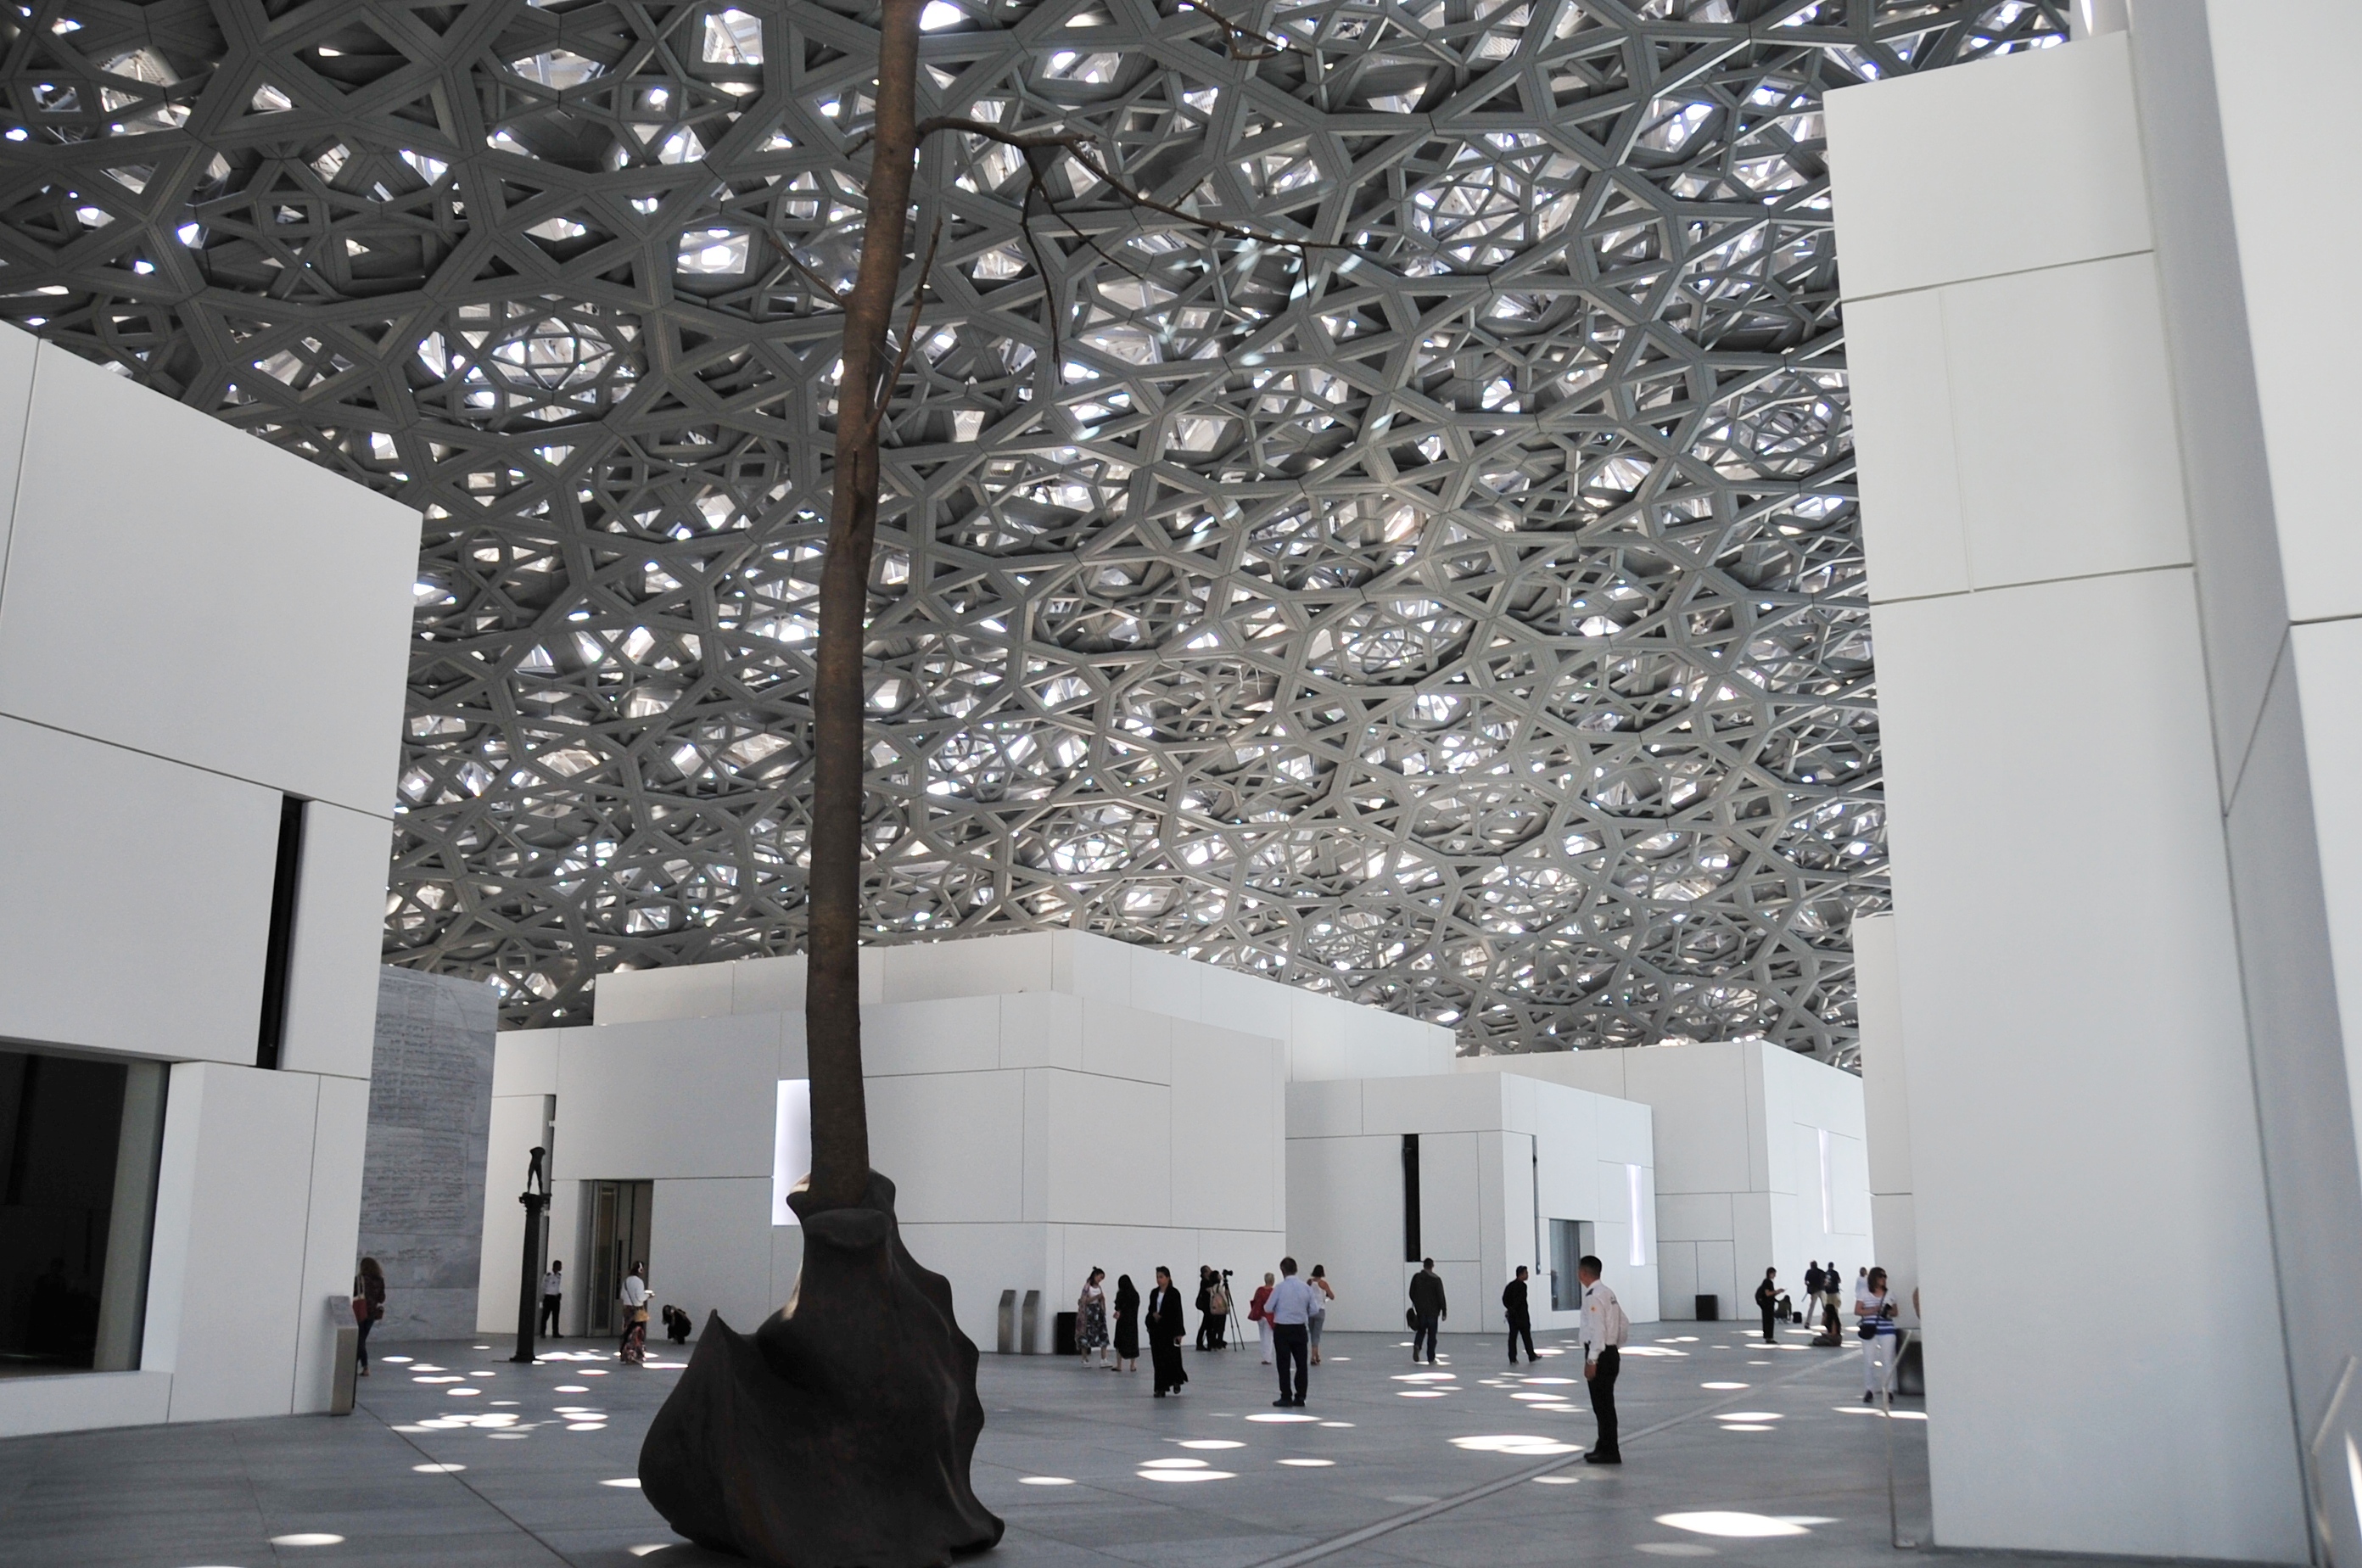 Make new Louvre Abu Dhabi your top place to visit this winter